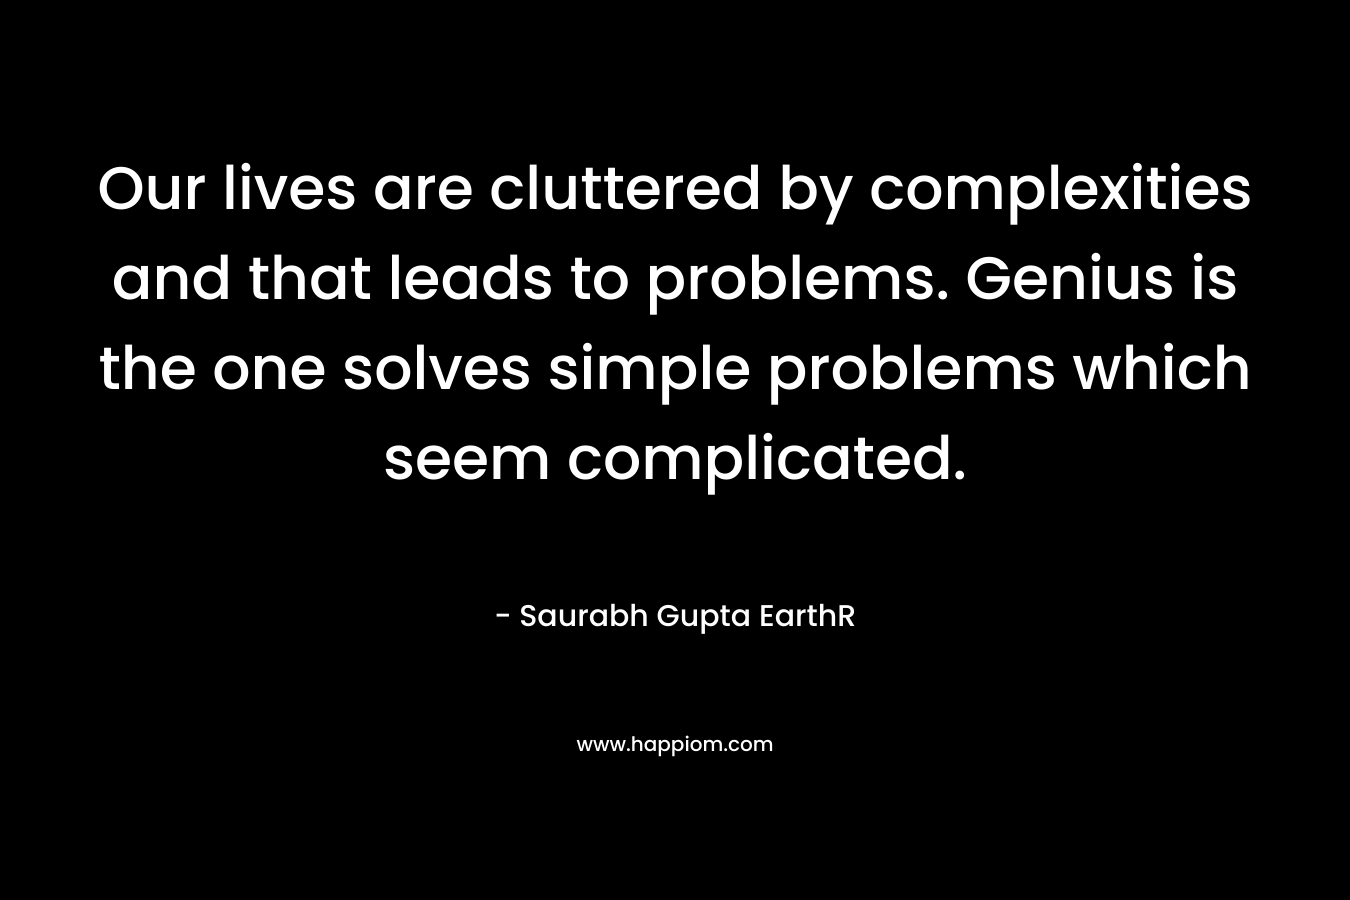 Our lives are cluttered by complexities and that leads to problems. Genius is the one solves simple problems which seem complicated. – Saurabh Gupta EarthR